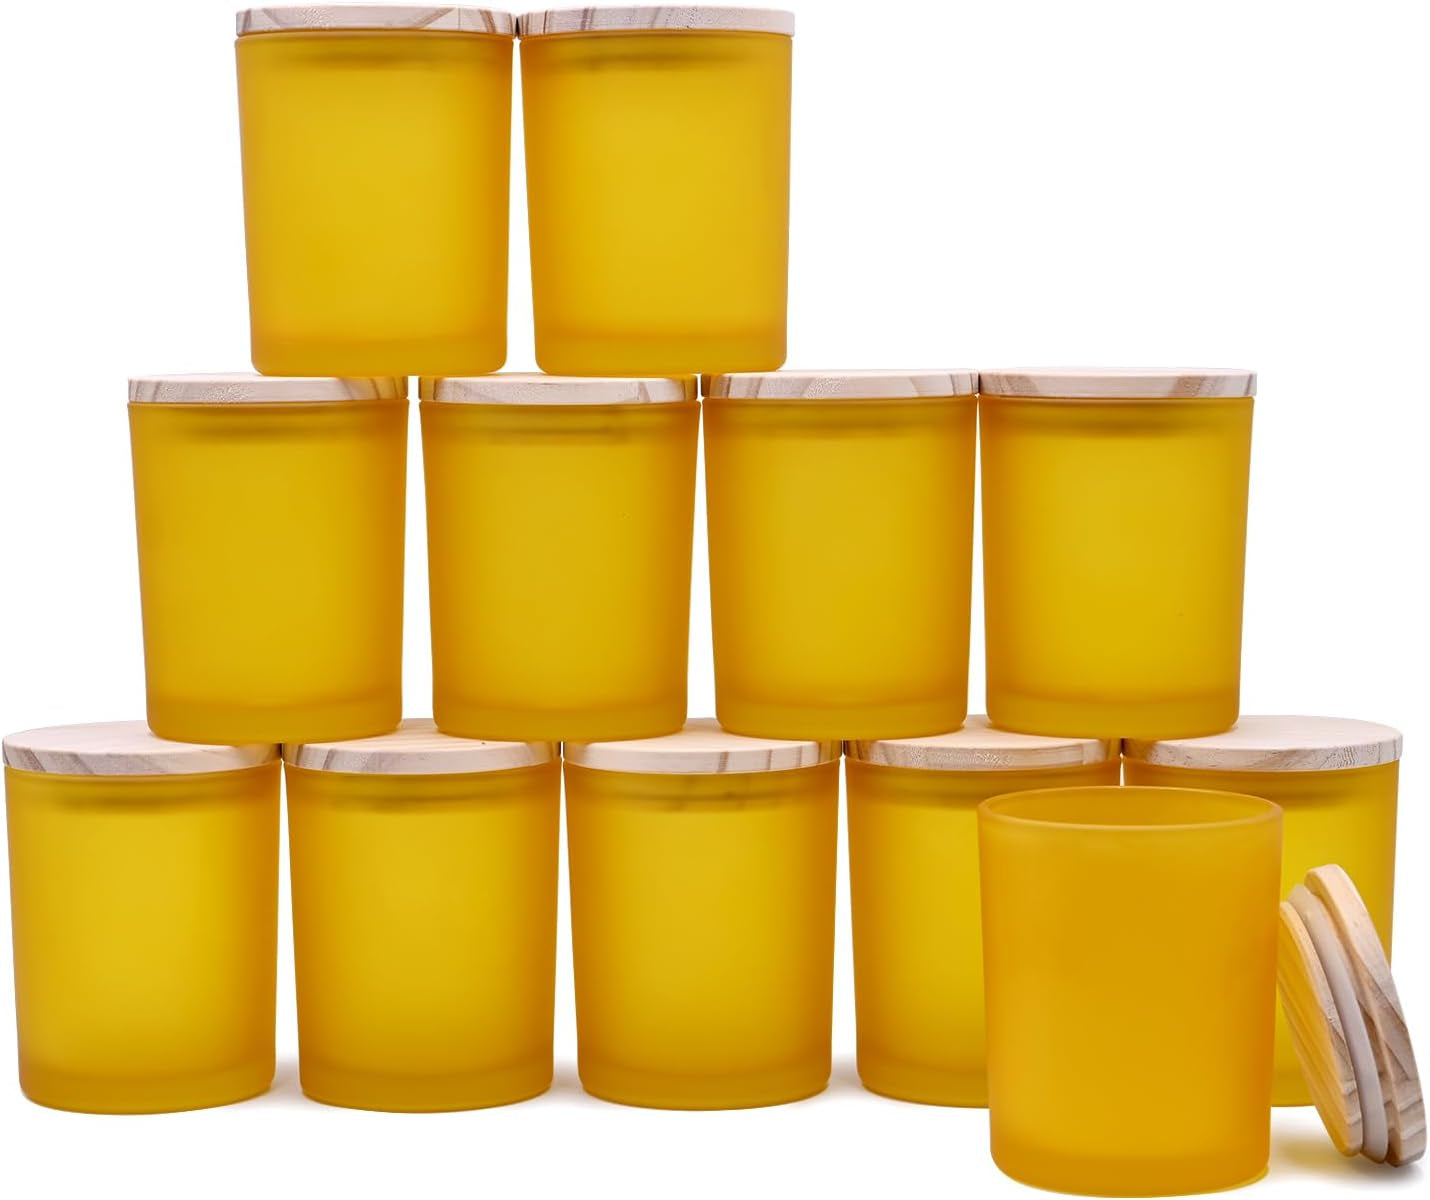 Thick Candle Jars for Making Candles 12 Pcs, 7 OZ Empty Jars with Wood Lids for Candle Making, Sample Container - Dishwasher Safe, Clear